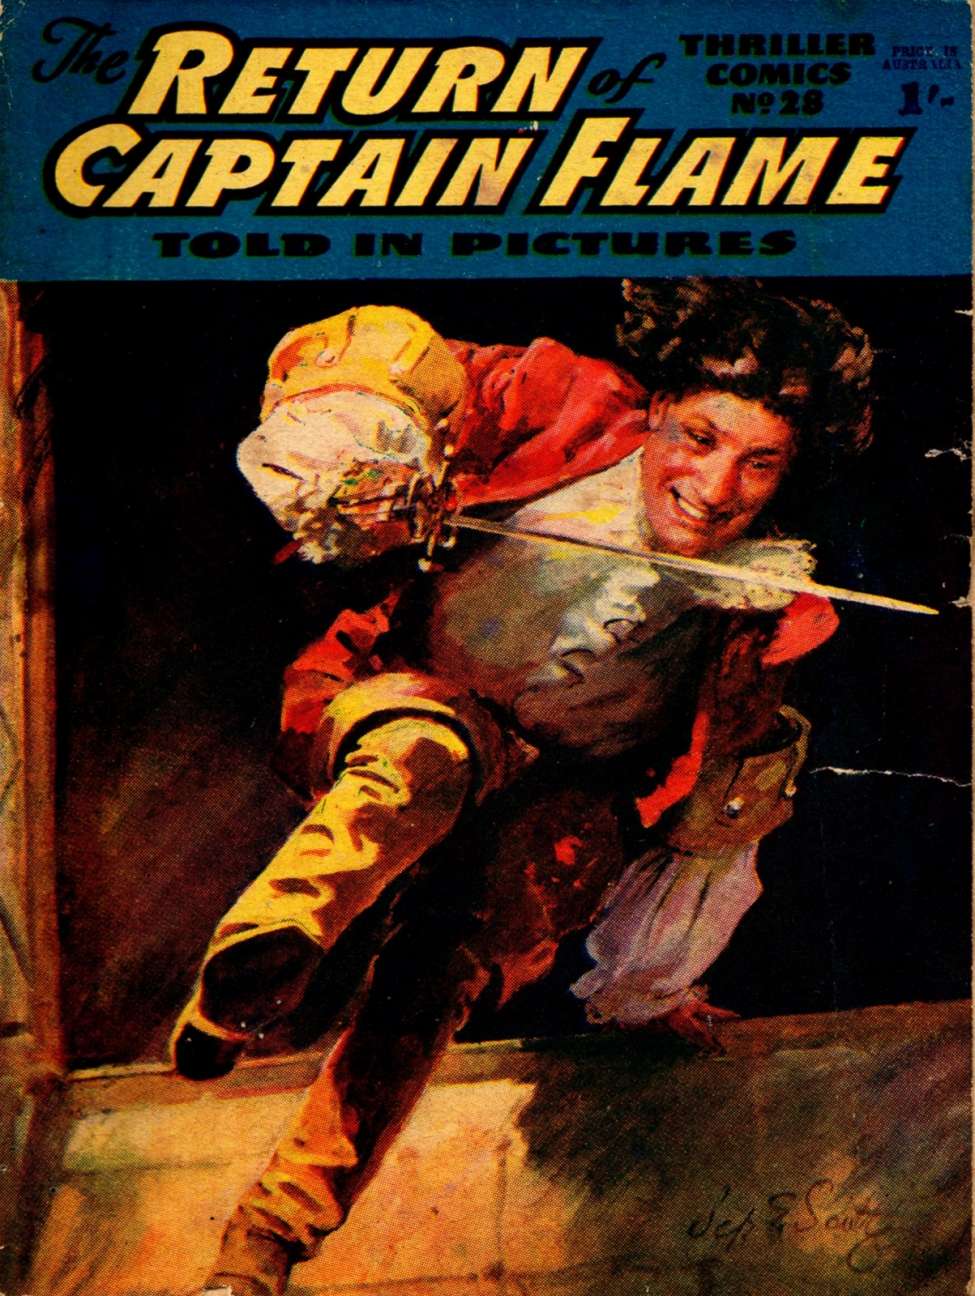 Book Cover For Thriller Comics 28 - The Return of Captain Flame